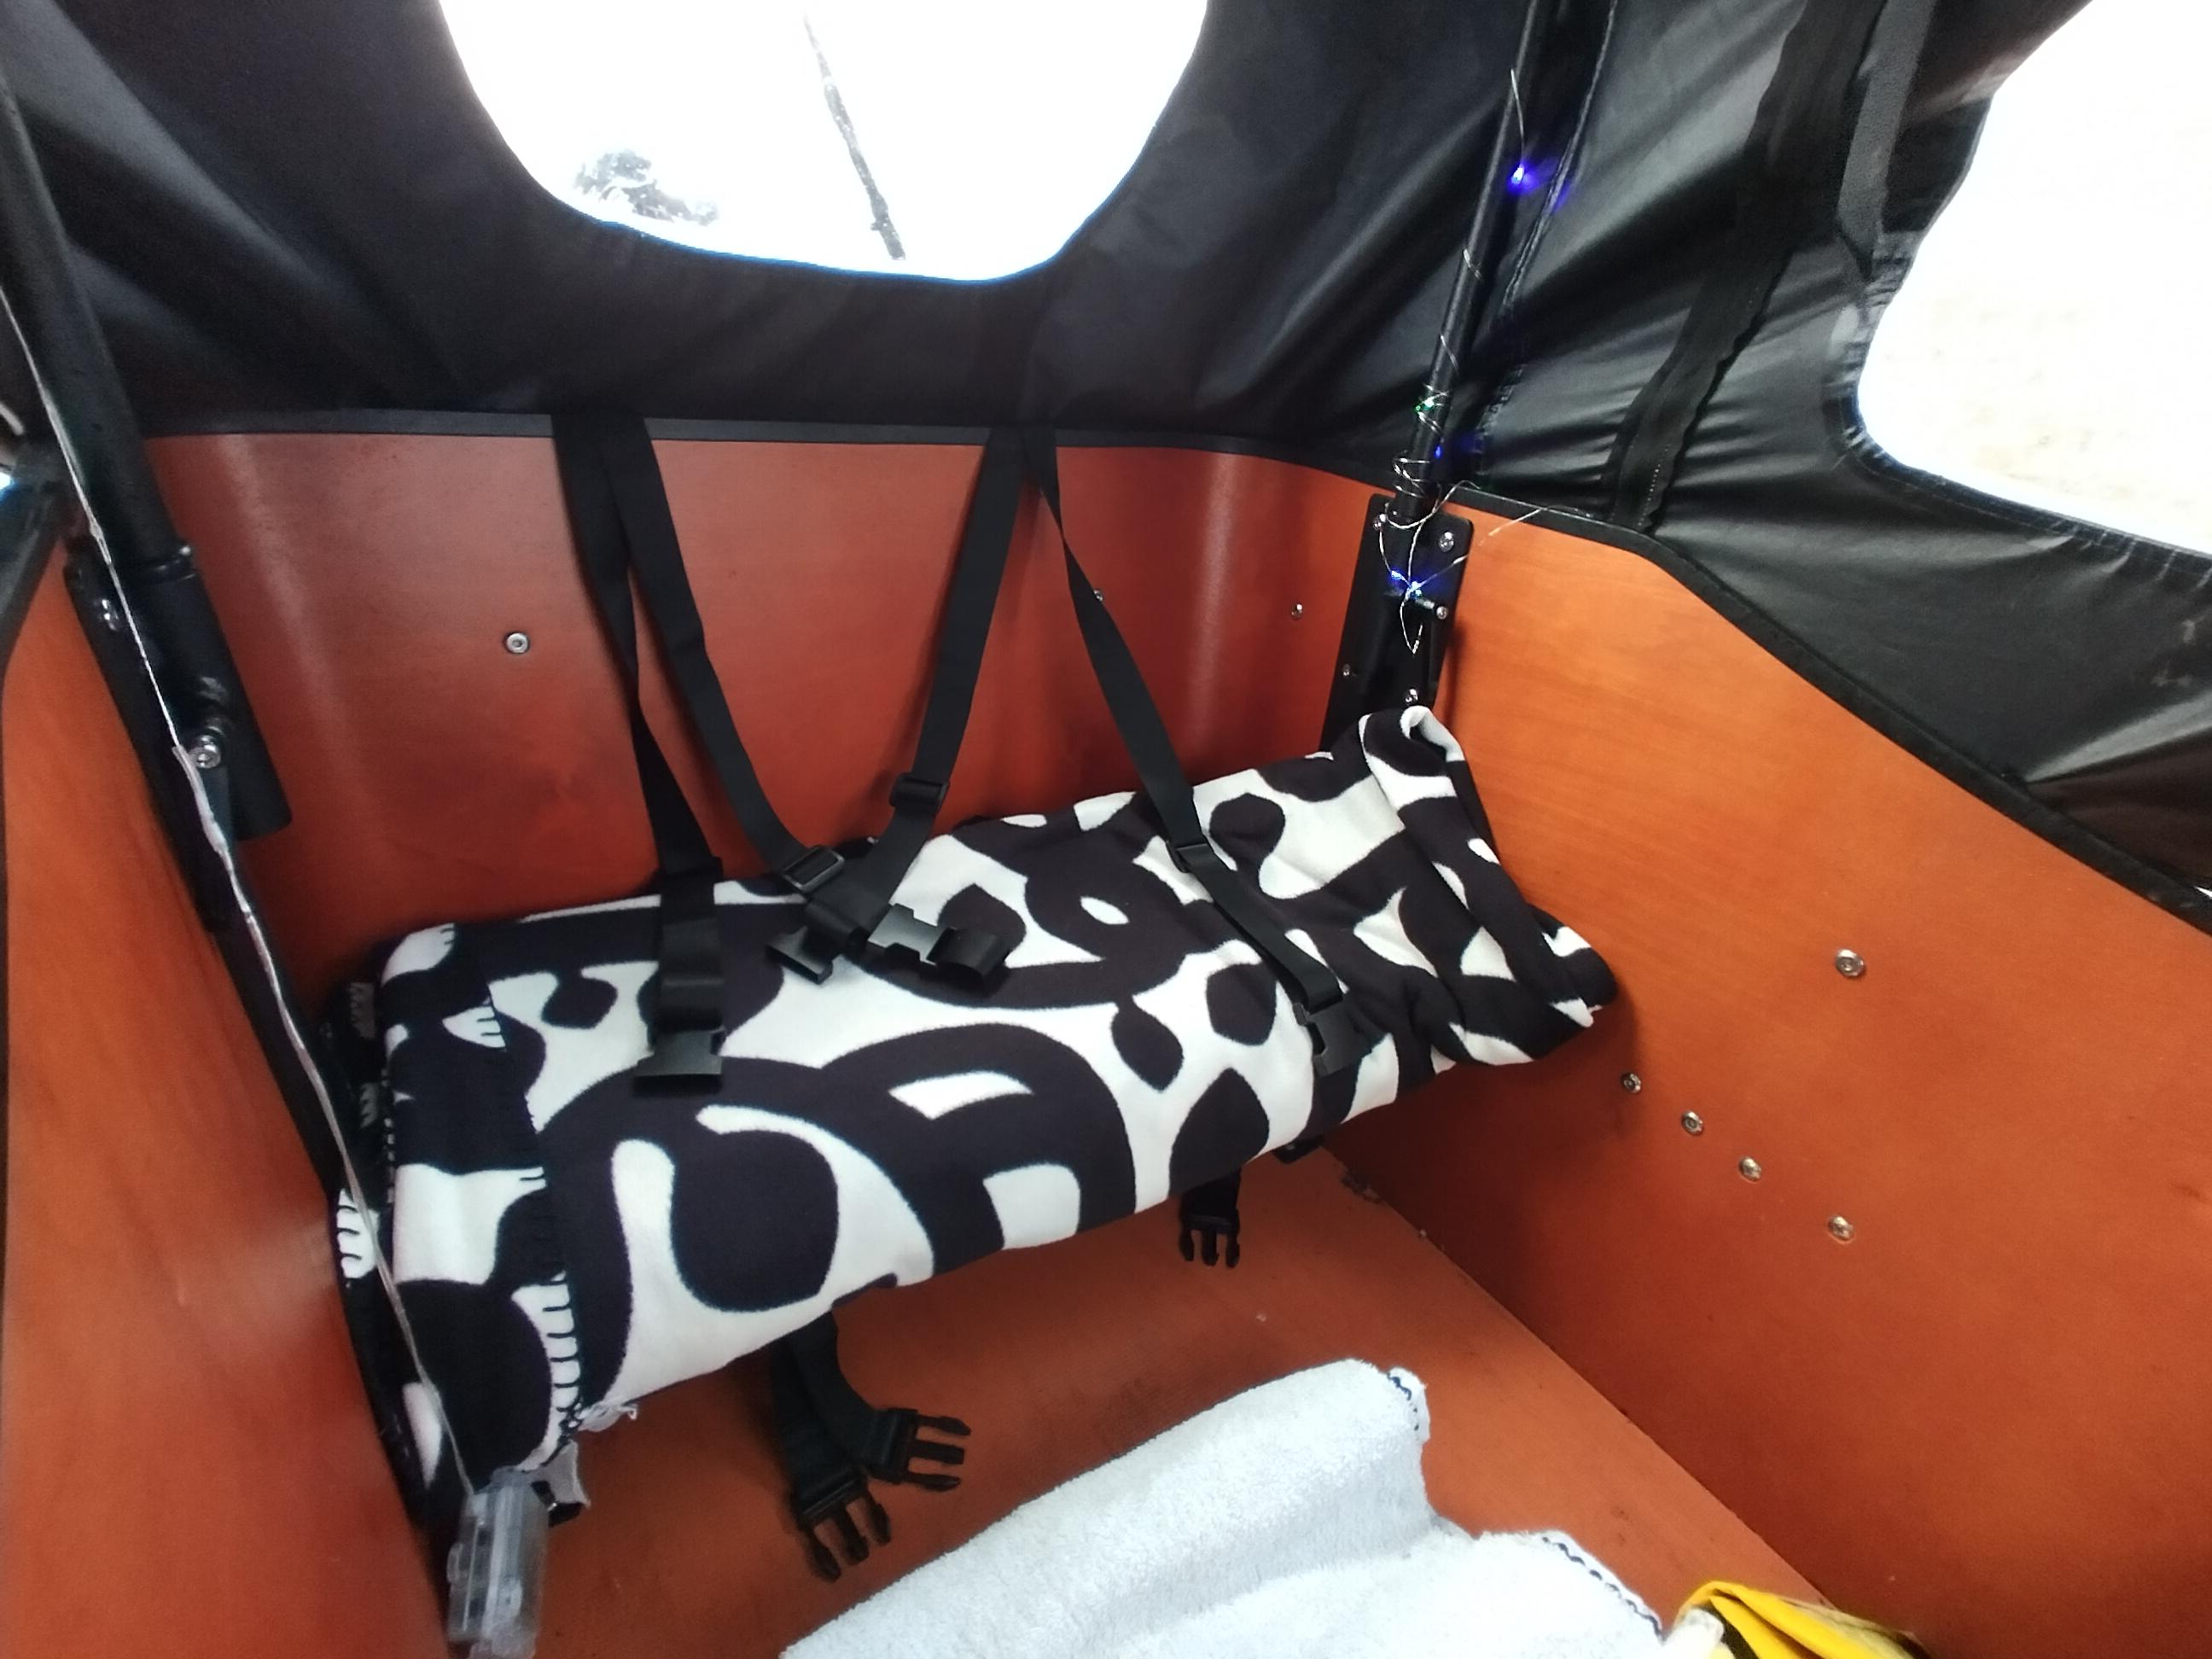 Inside the bucket, with the rain cover on. A fleece blanket lies across the seat.